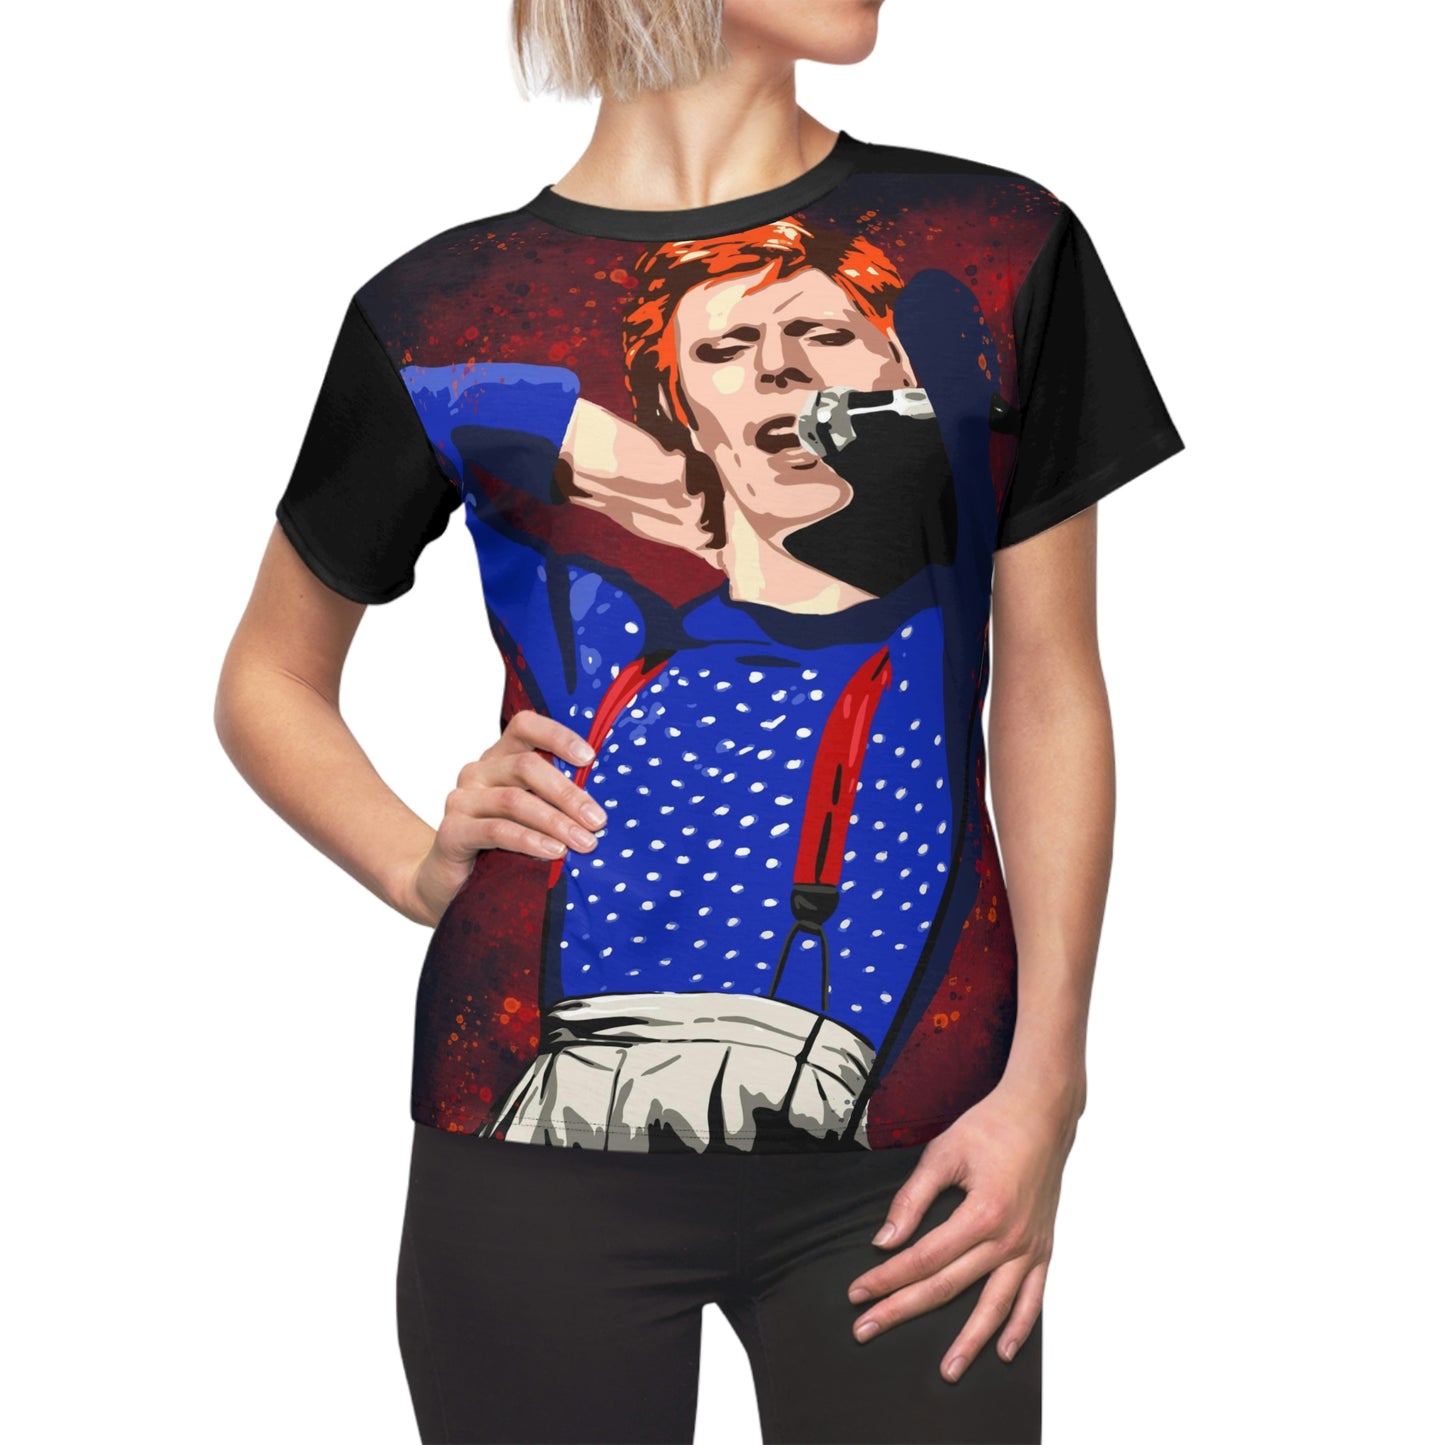 David Bowie T-shirt, Diamond Dogs tour, David Live, 1974, gift for Bowie fan, gift for music lover